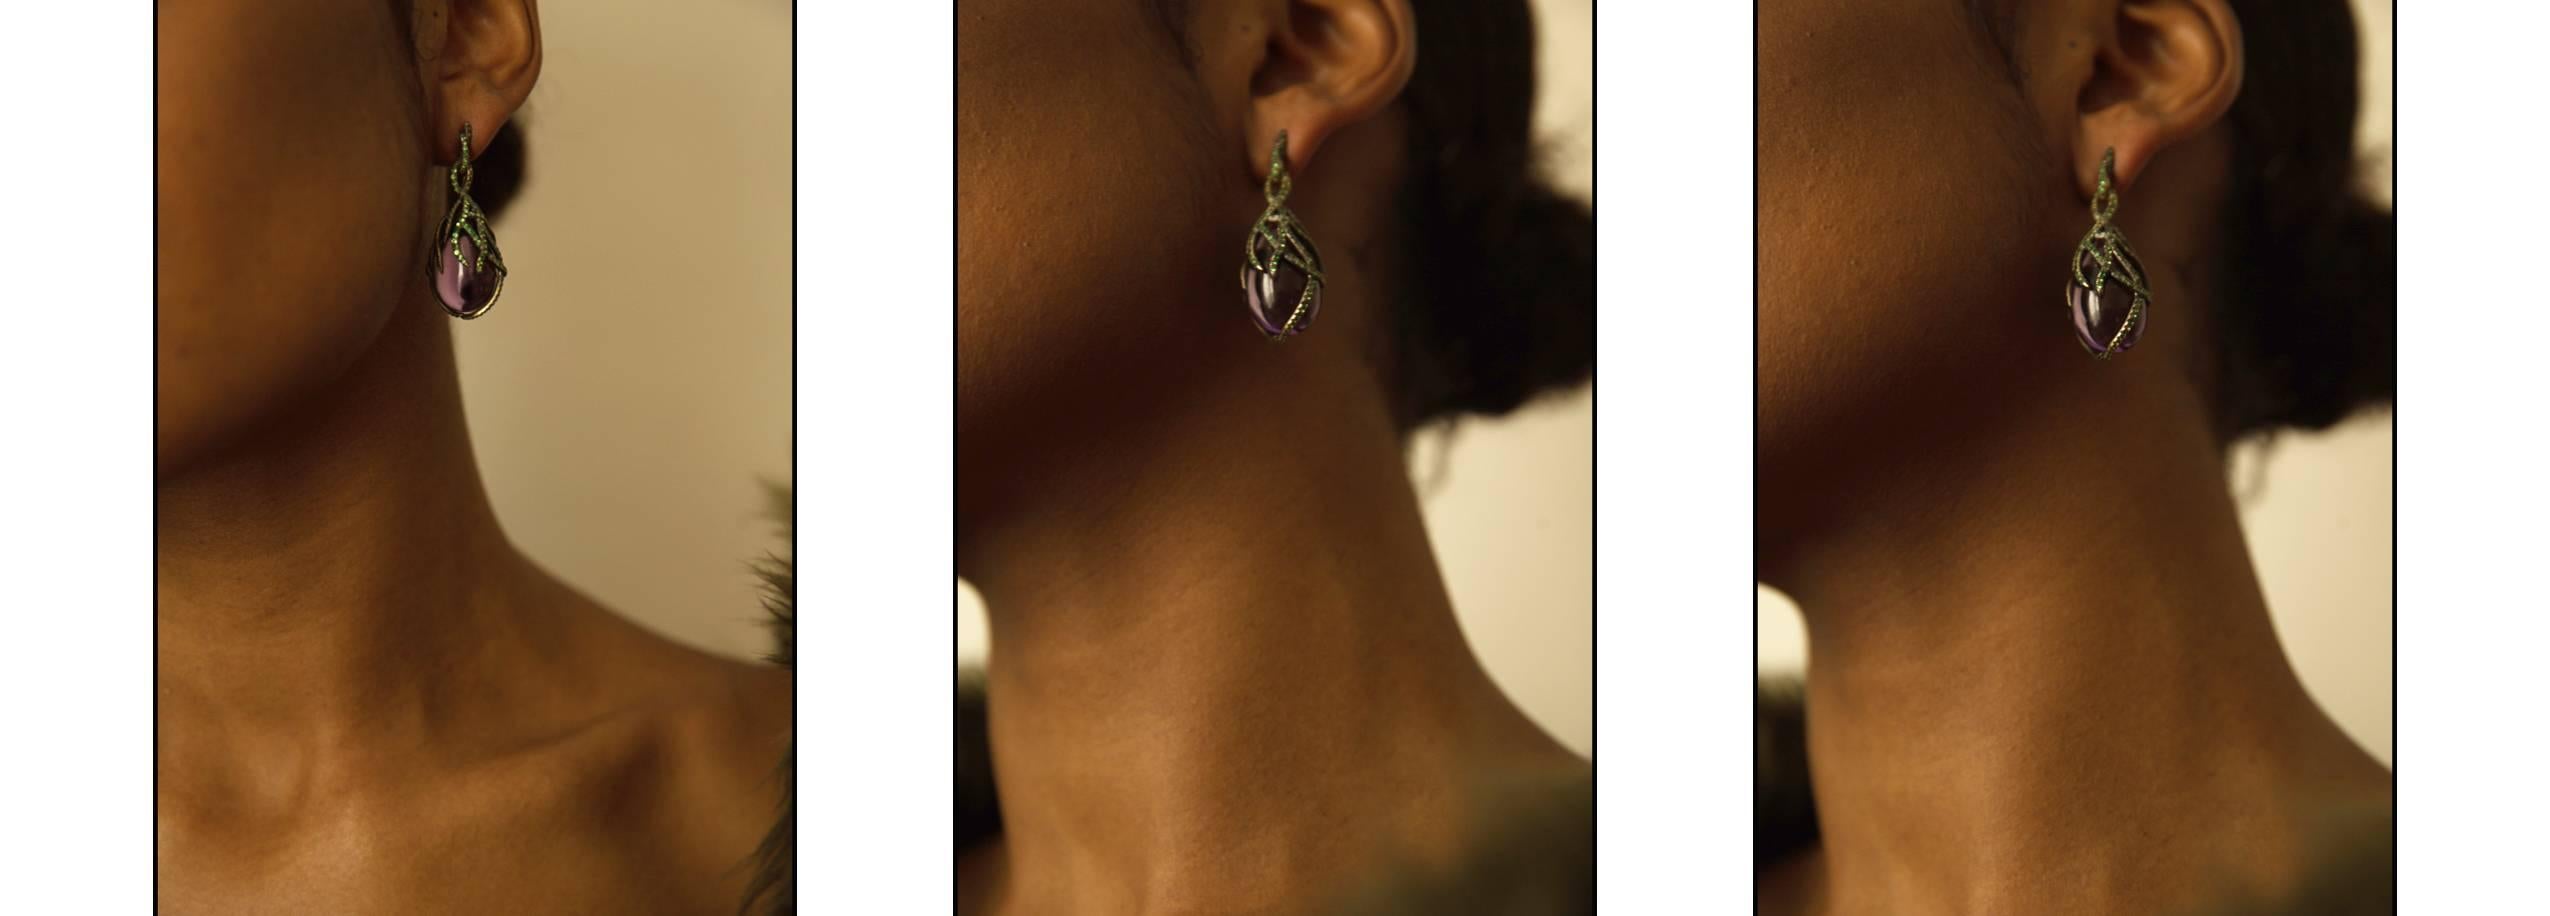 Contemporary Wendy Brandes 50 Carat Amethyst Drop Earrings With Tsavorites in 18K Yellow Gold